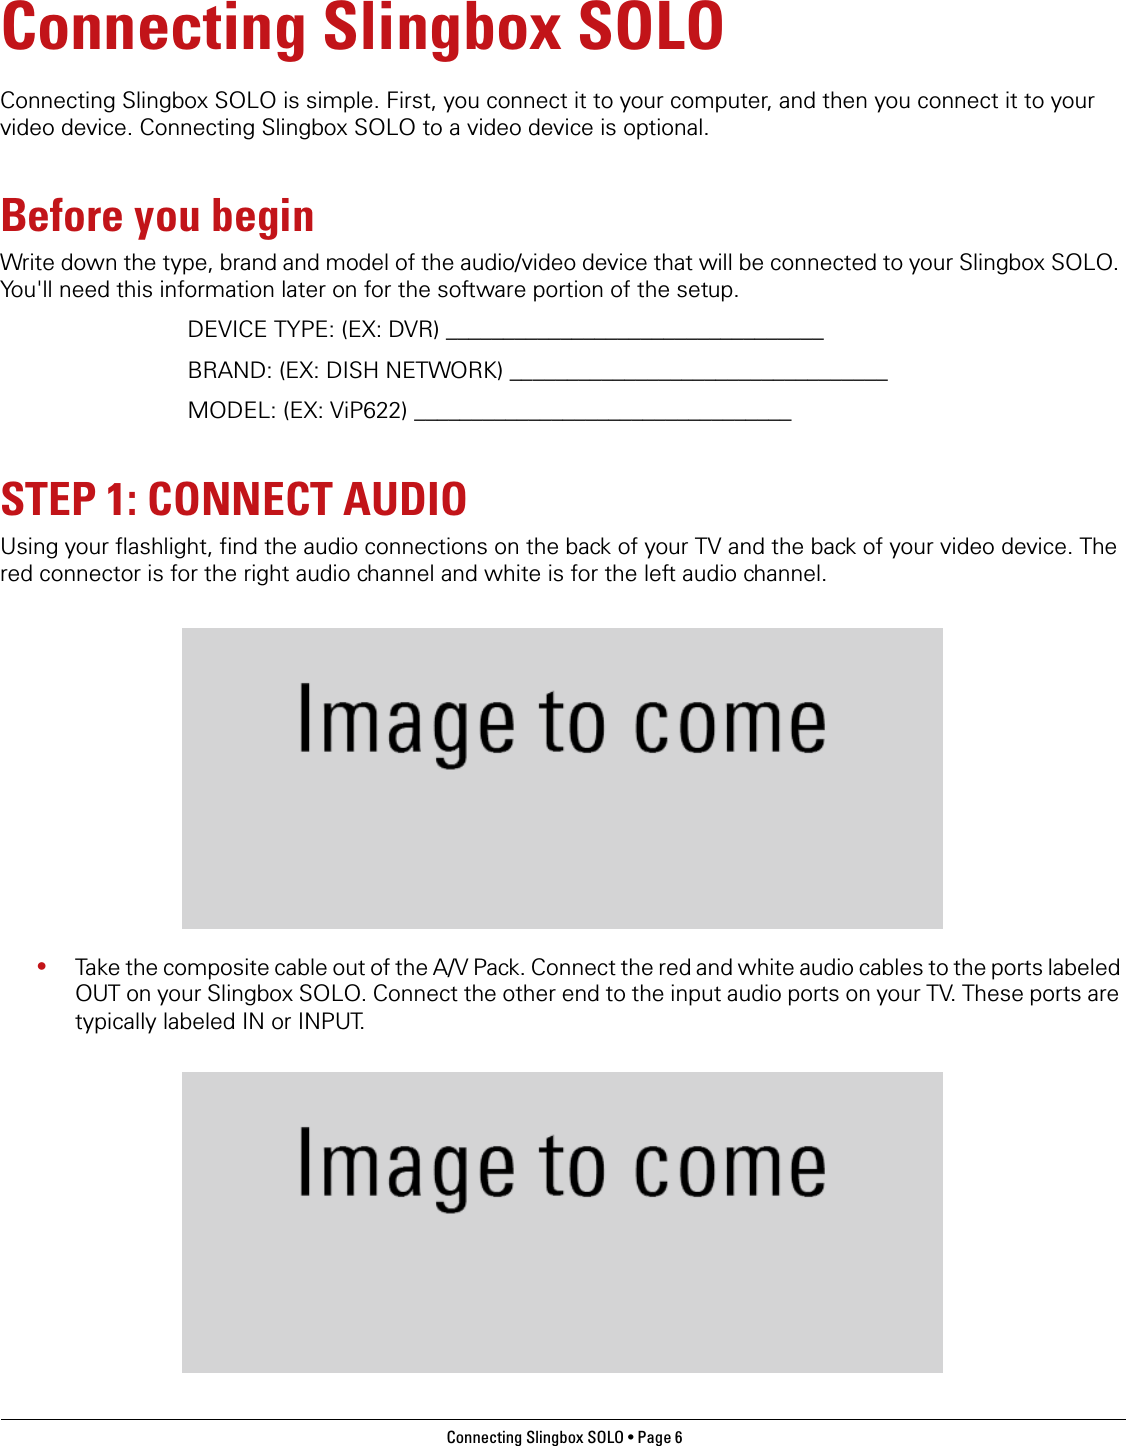 Connecting Slingbox SOLO • Page 6 Connecting Slingbox SOLOConnecting Slingbox SOLO is simple. First, you connect it to your computer, and then you connect it to your video device. Connecting Slingbox SOLO to a video device is optional.Before you beginWrite down the type, brand and model of the audio/video device that will be connected to your Slingbox SOLO. You&apos;ll need this information later on for the software portion of the setup.DEVICE TYPE: (EX: DVR) _________________________________BRAND: (EX: DISH NETWORK) _________________________________MODEL: (EX: ViP622) _________________________________STEP 1: CONNECT AUDIOUsing your flashlight, find the audio connections on the back of your TV and the back of your video device. The red connector is for the right audio channel and white is for the left audio channel.•Take the composite cable out of the A/V Pack. Connect the red and white audio cables to the ports labeled OUT on your Slingbox SOLO. Connect the other end to the input audio ports on your TV. These ports are typically labeled IN or INPUT.